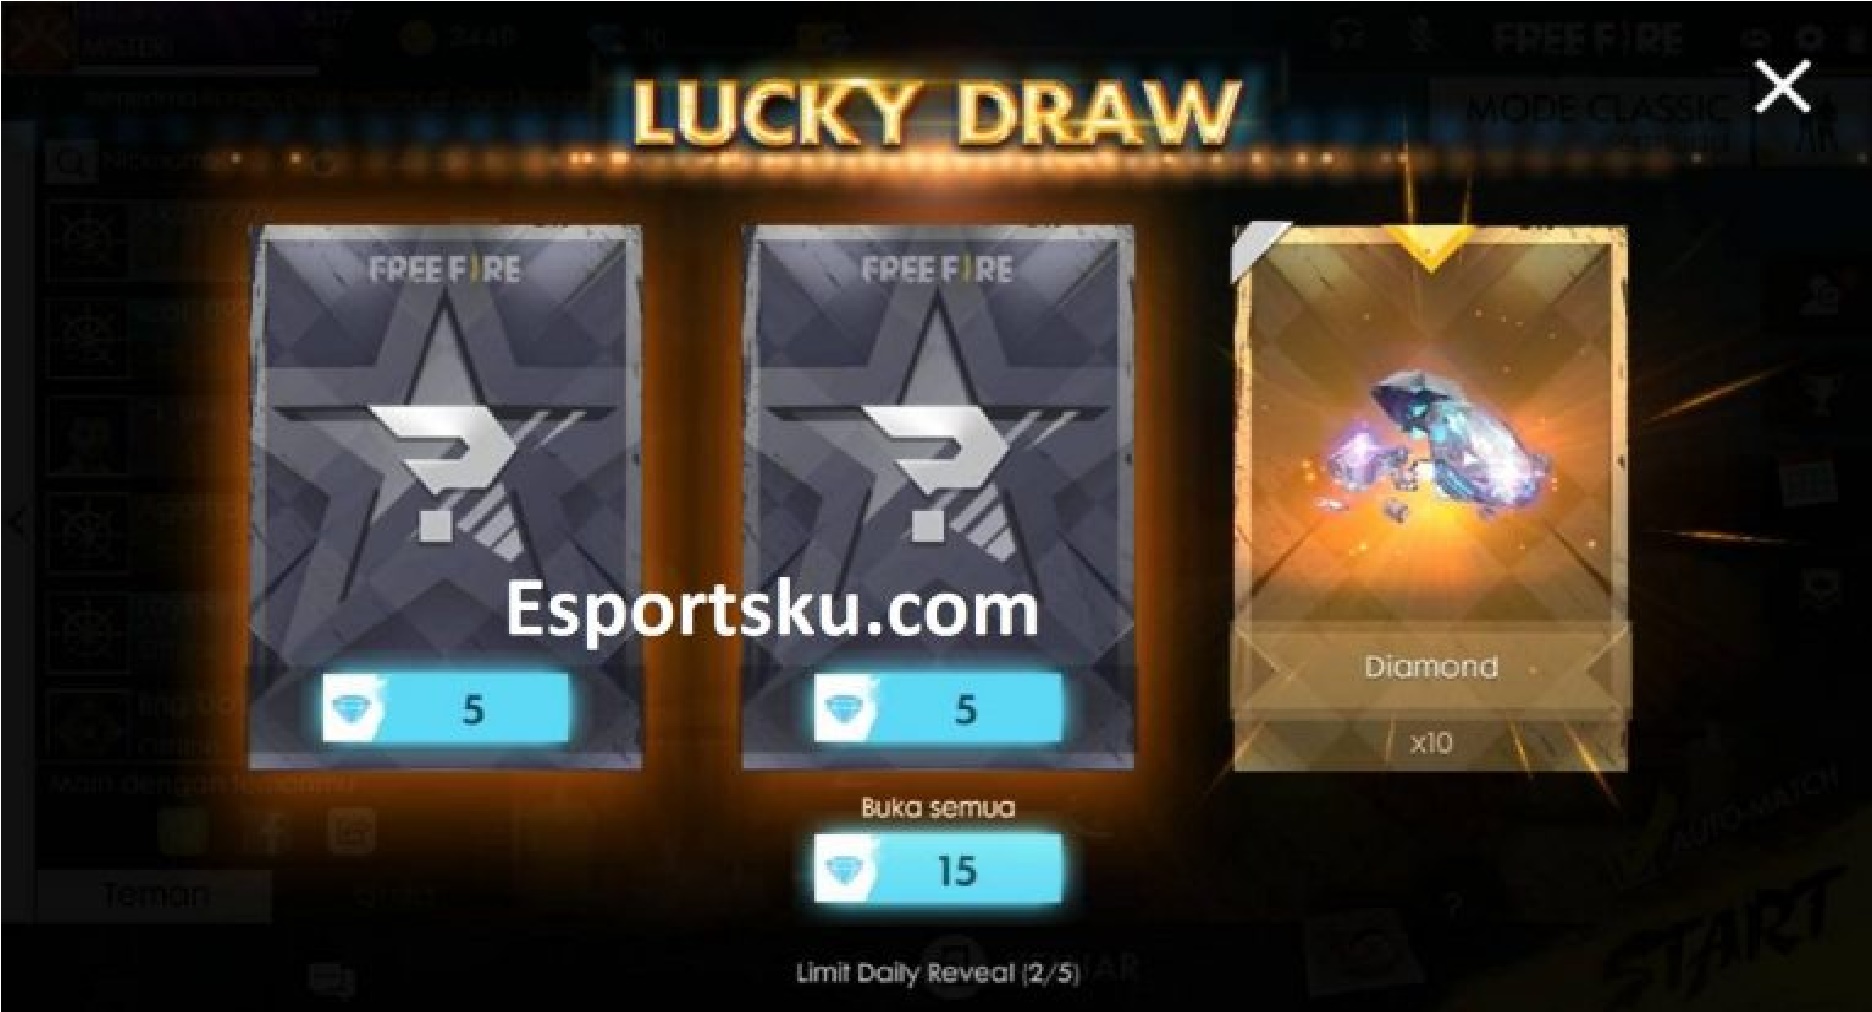 Butterful lucky draw event карта. Lucky draw mobile game. Lucky draw Box ПАБГ код.